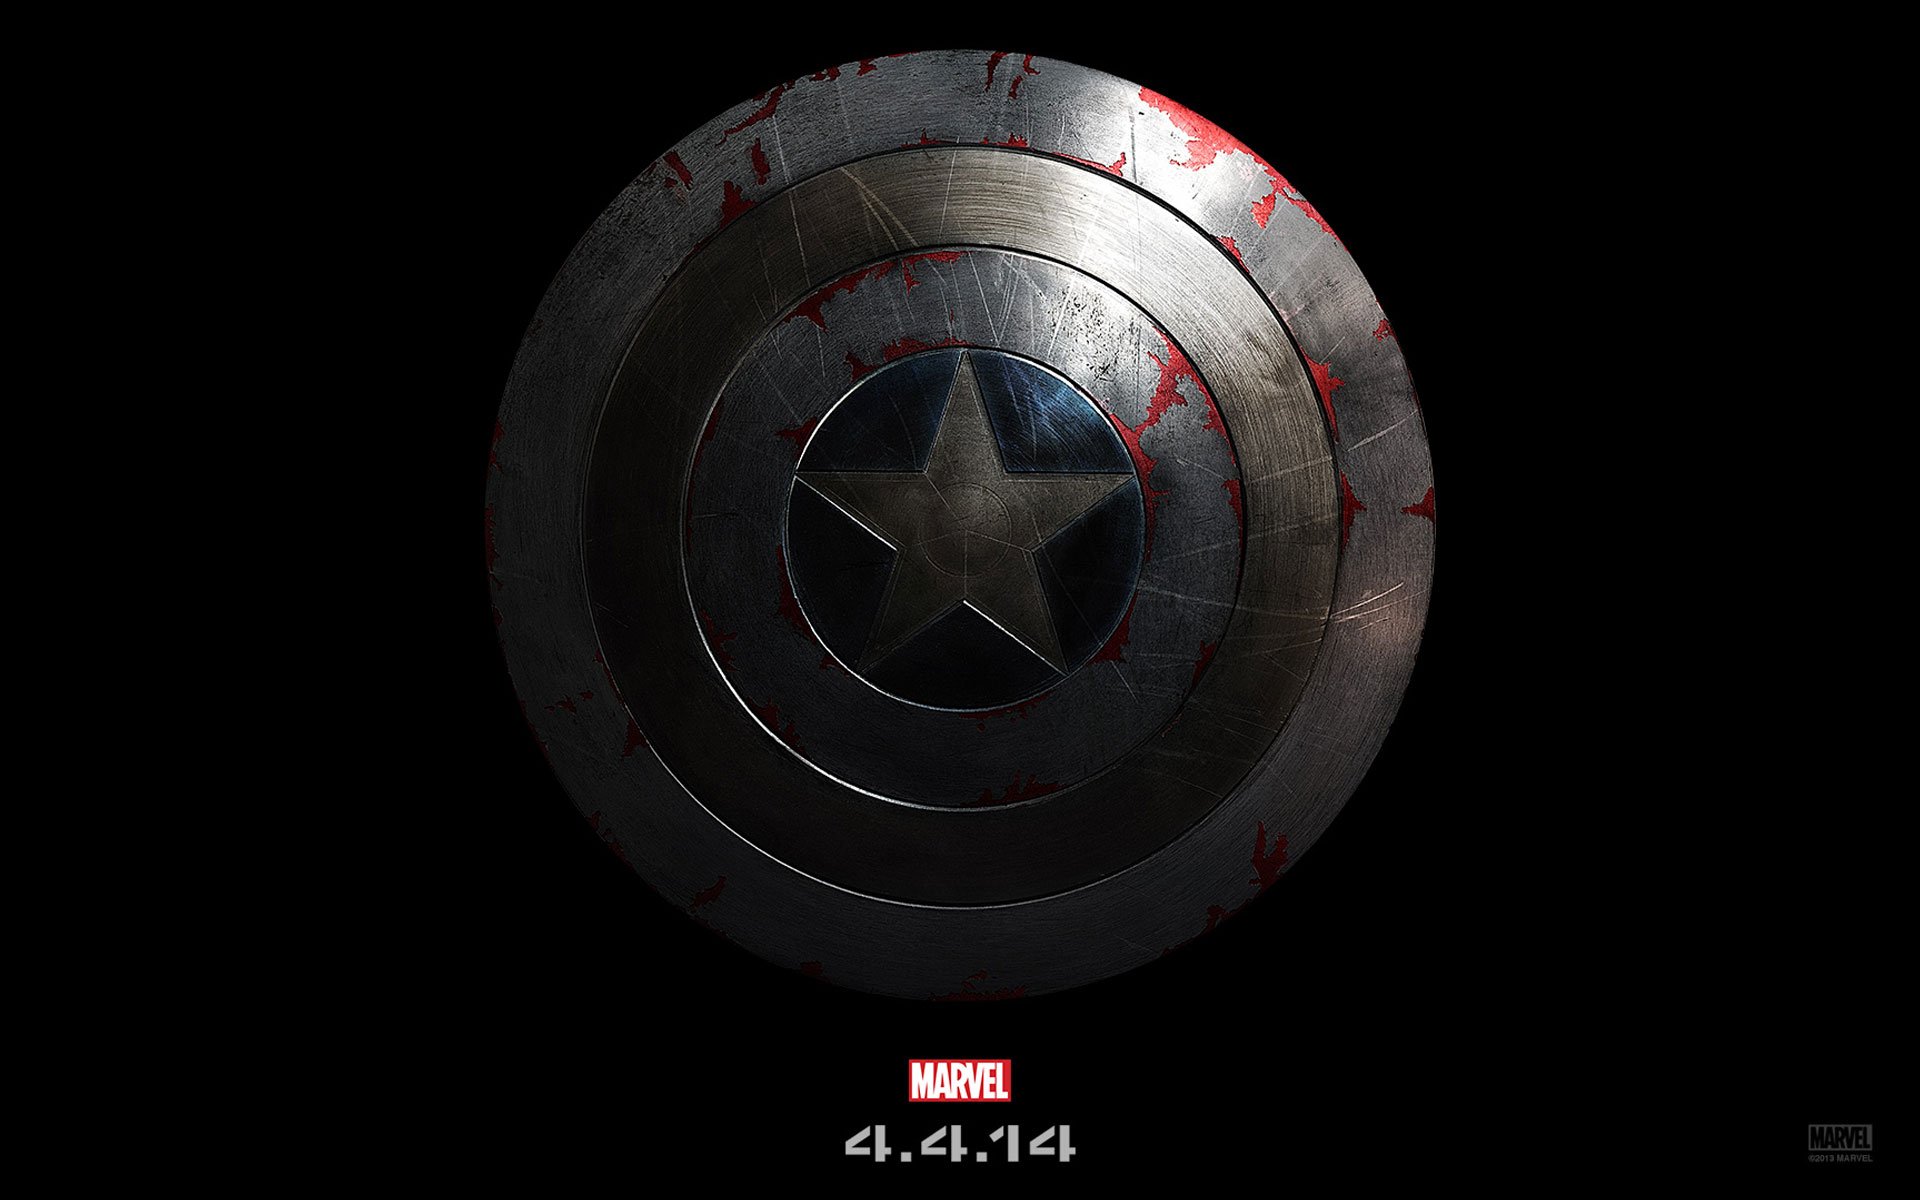 CAPTAIN AMERICA THE WINTER SOLDIER Wallpapers and Desktop Backgrounds